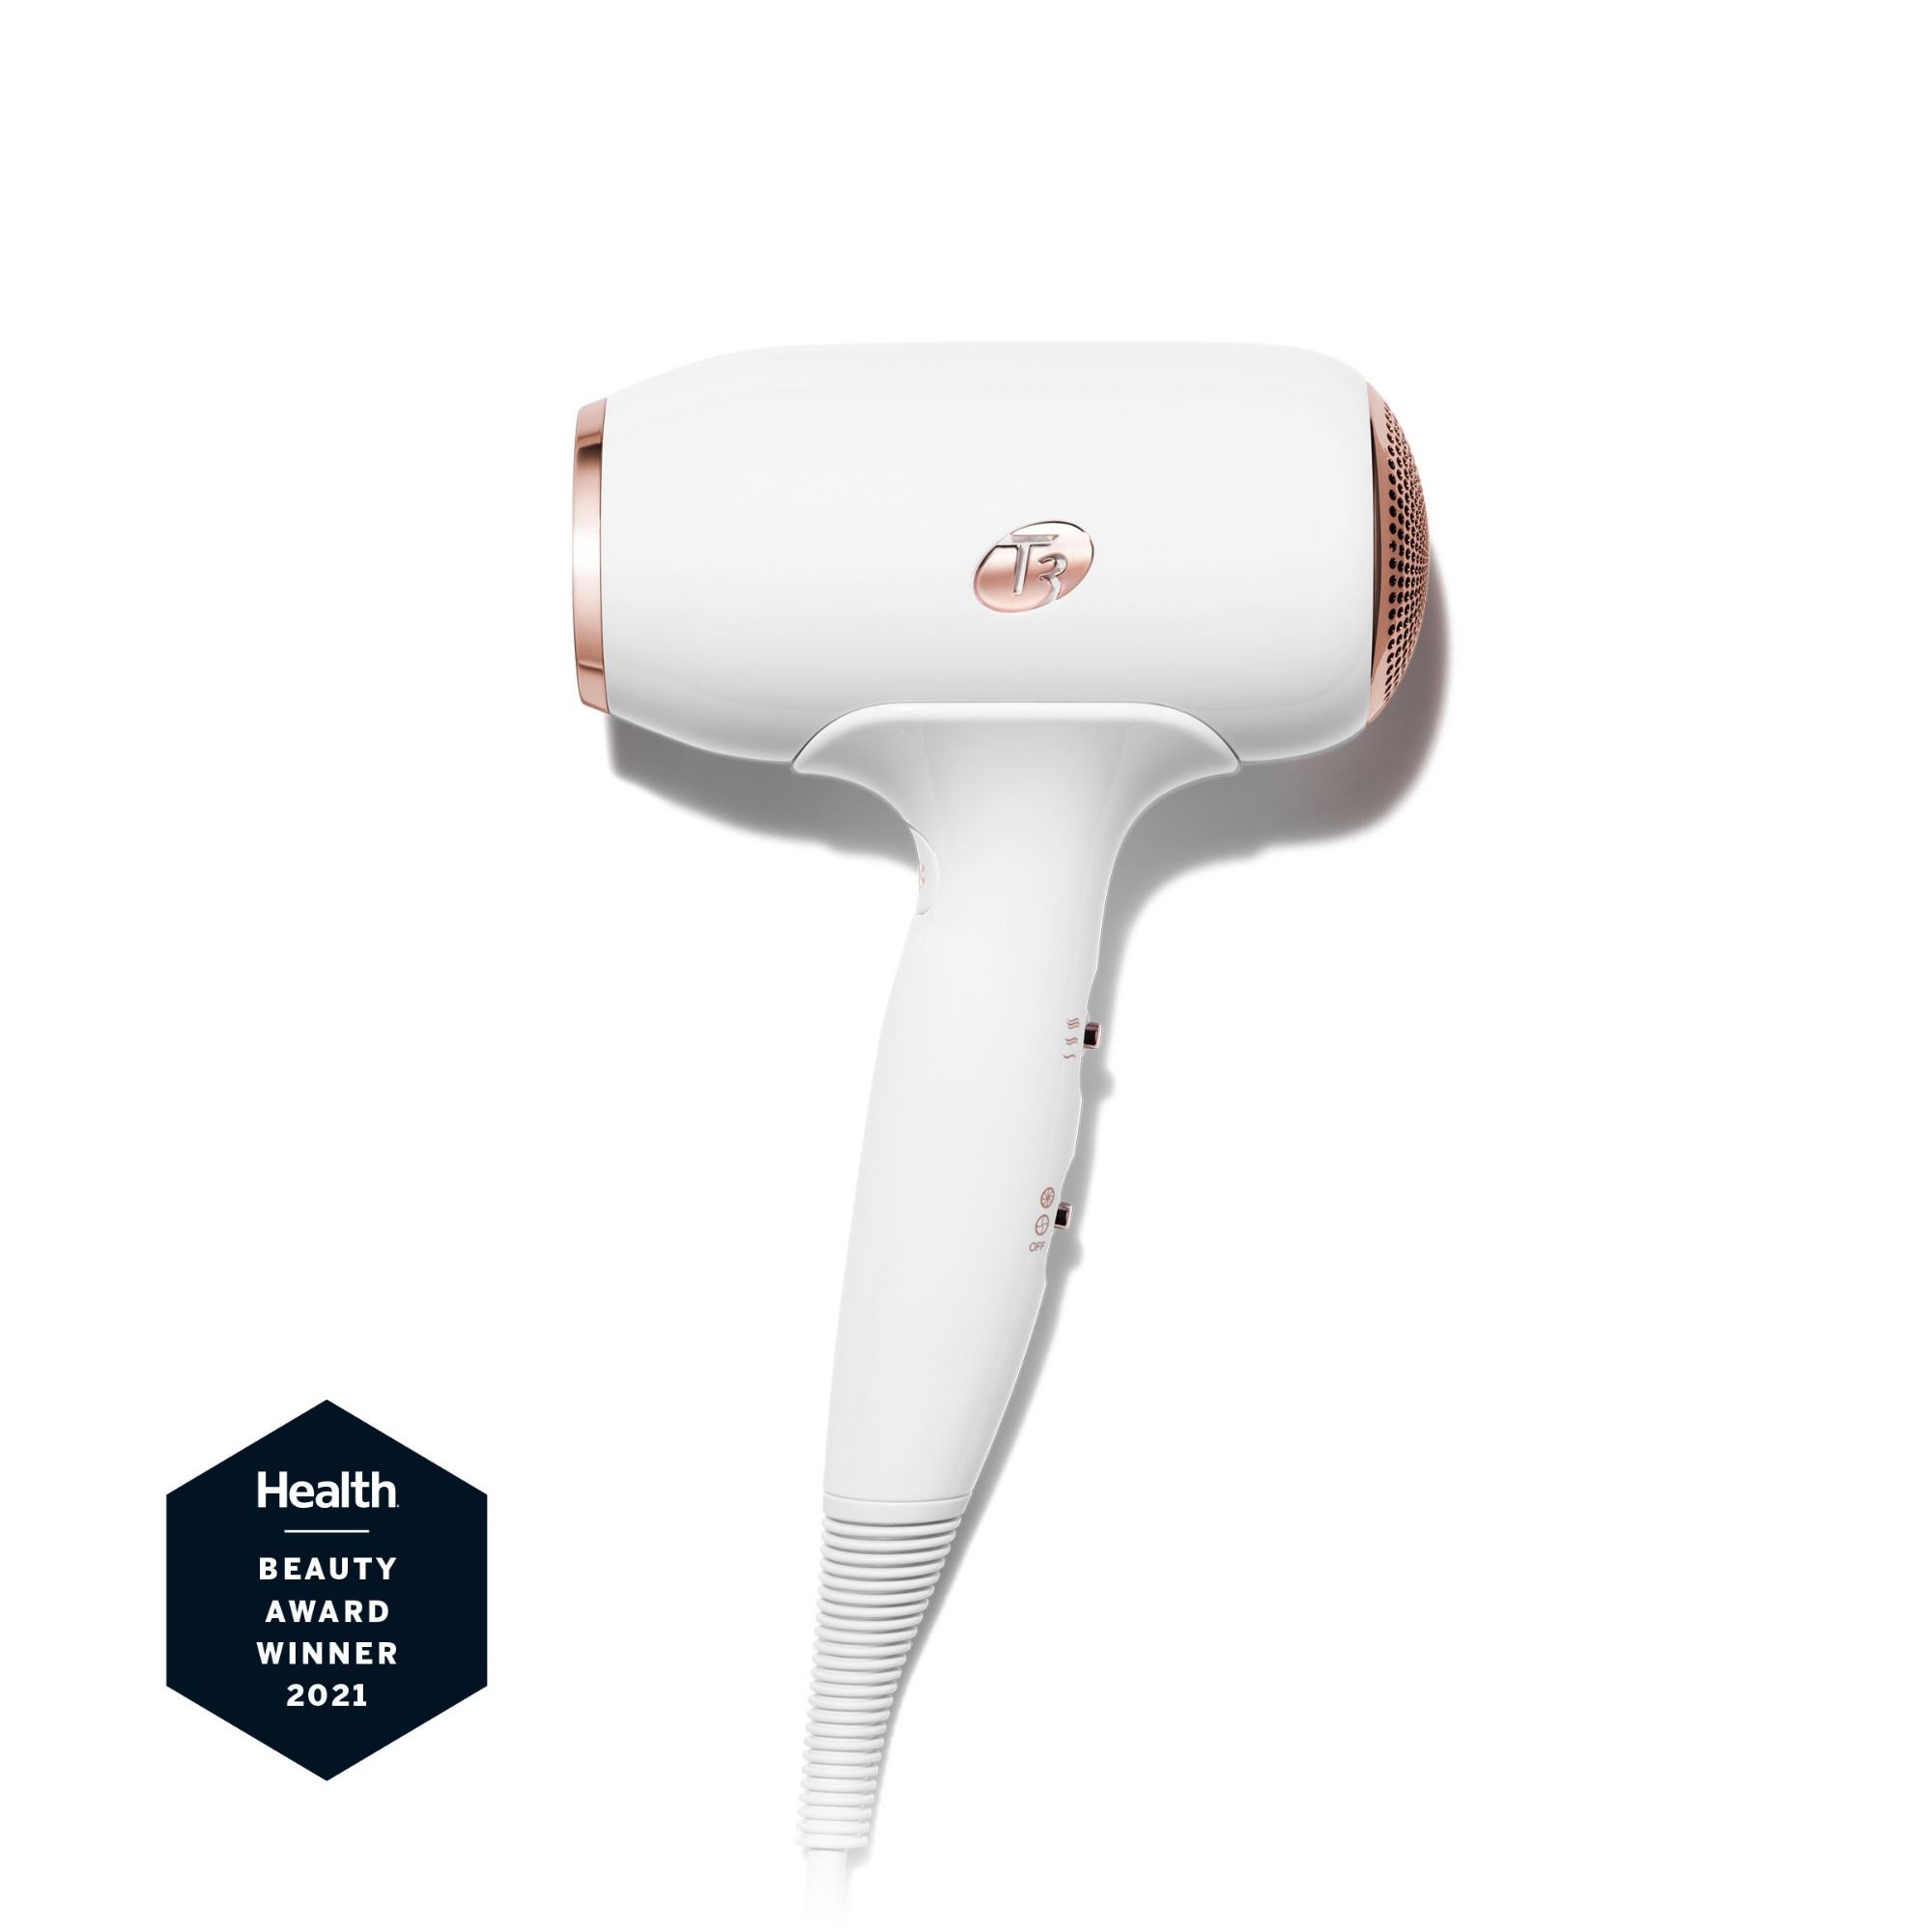 T3 Micro Fit ionic compact hair dryer